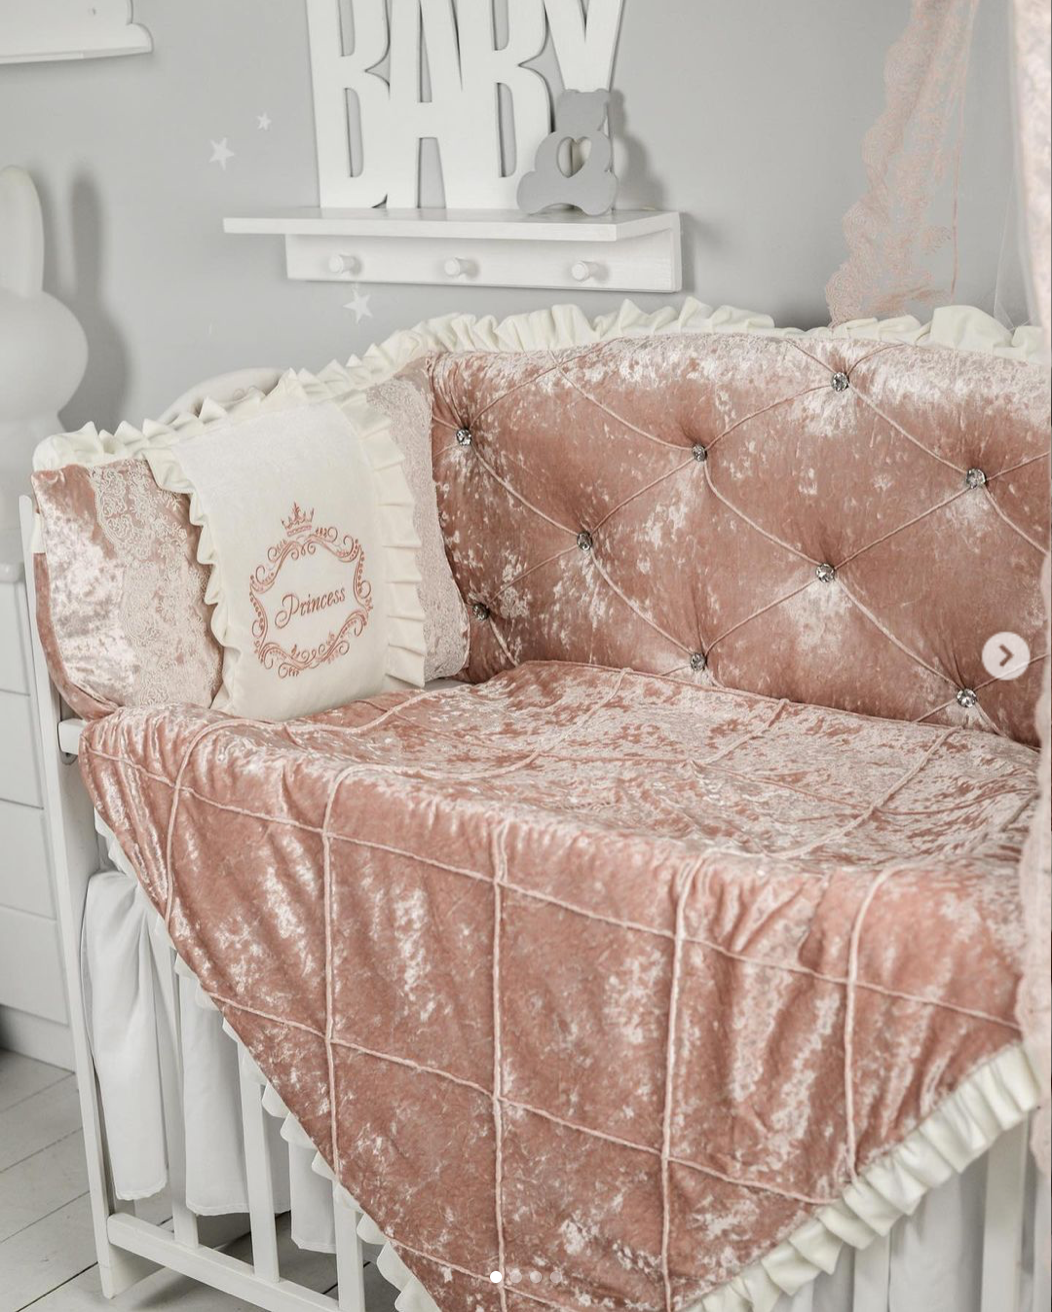 Give Your Baby the Ultimate Sleeping Experience with Our Luxurious Bedding Set